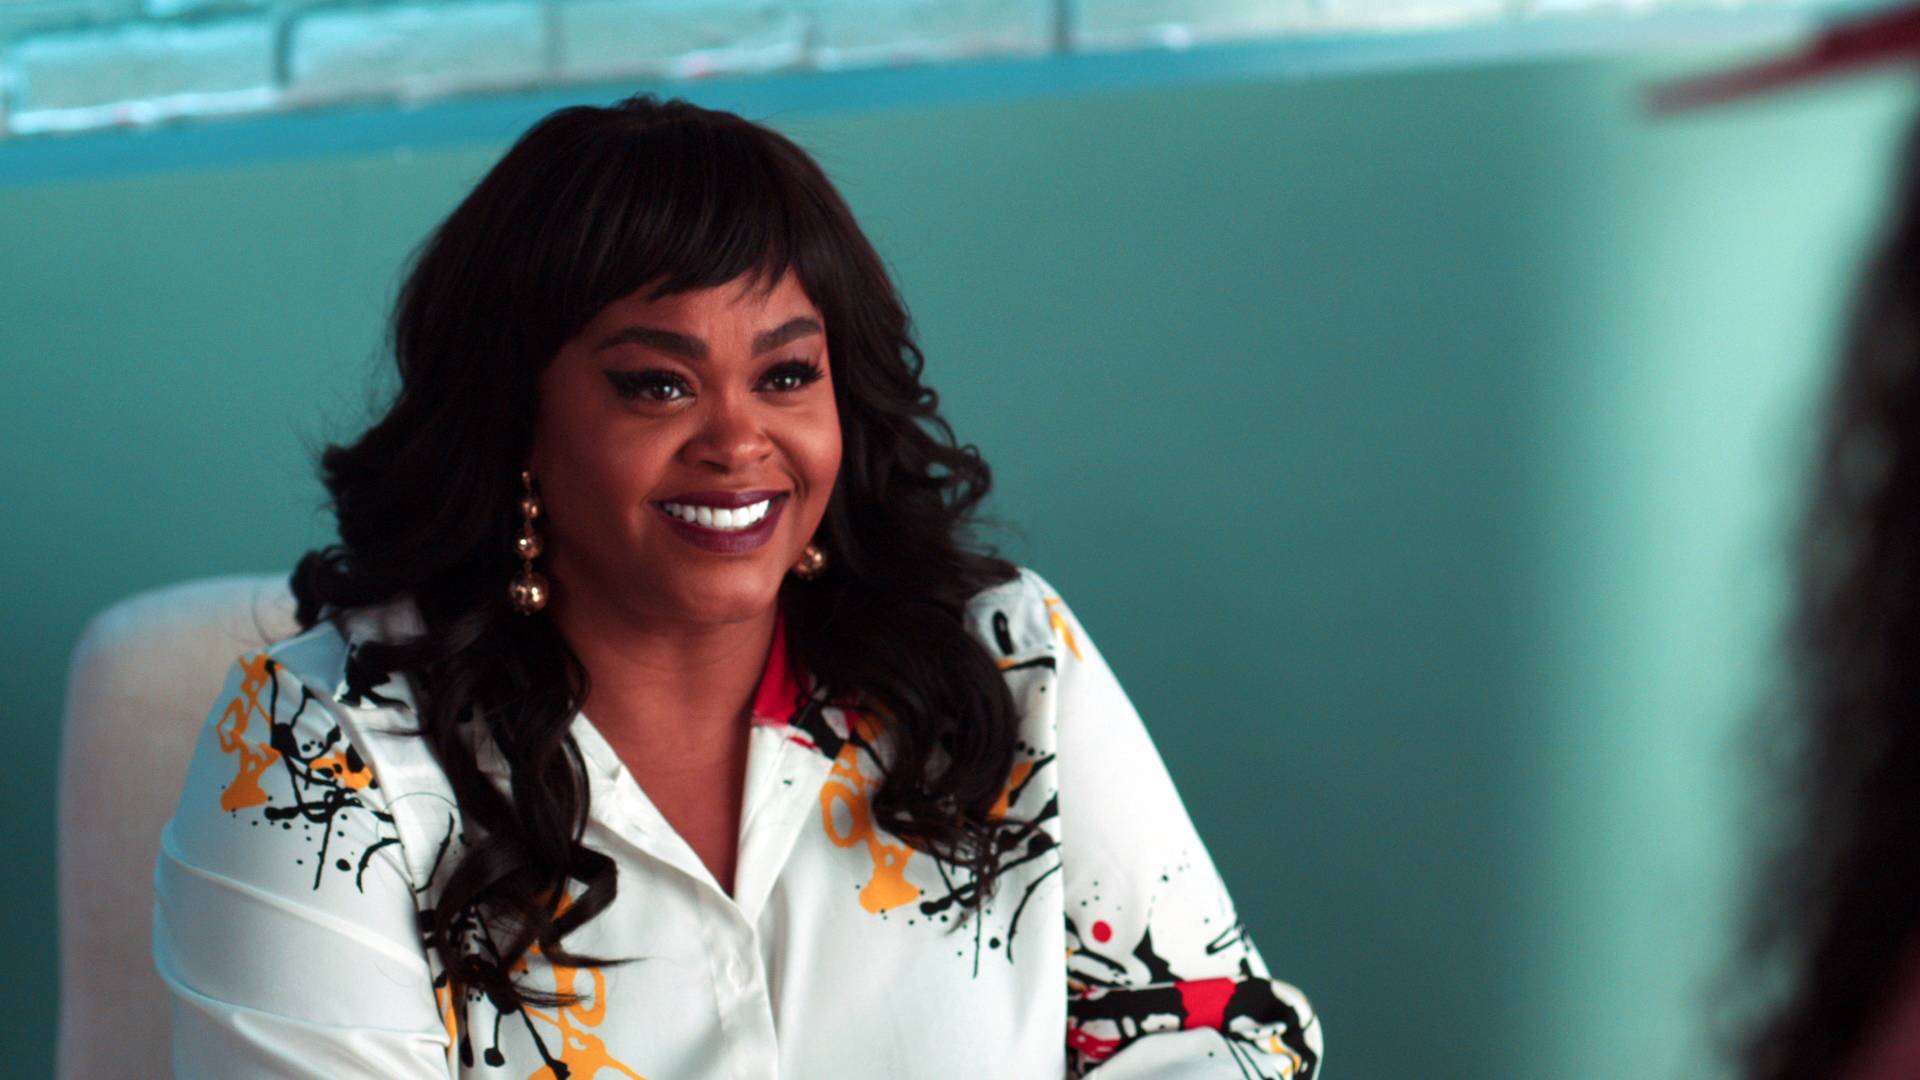 First Wives Club' Star Jill Scott Discusses Her Love Languages, News